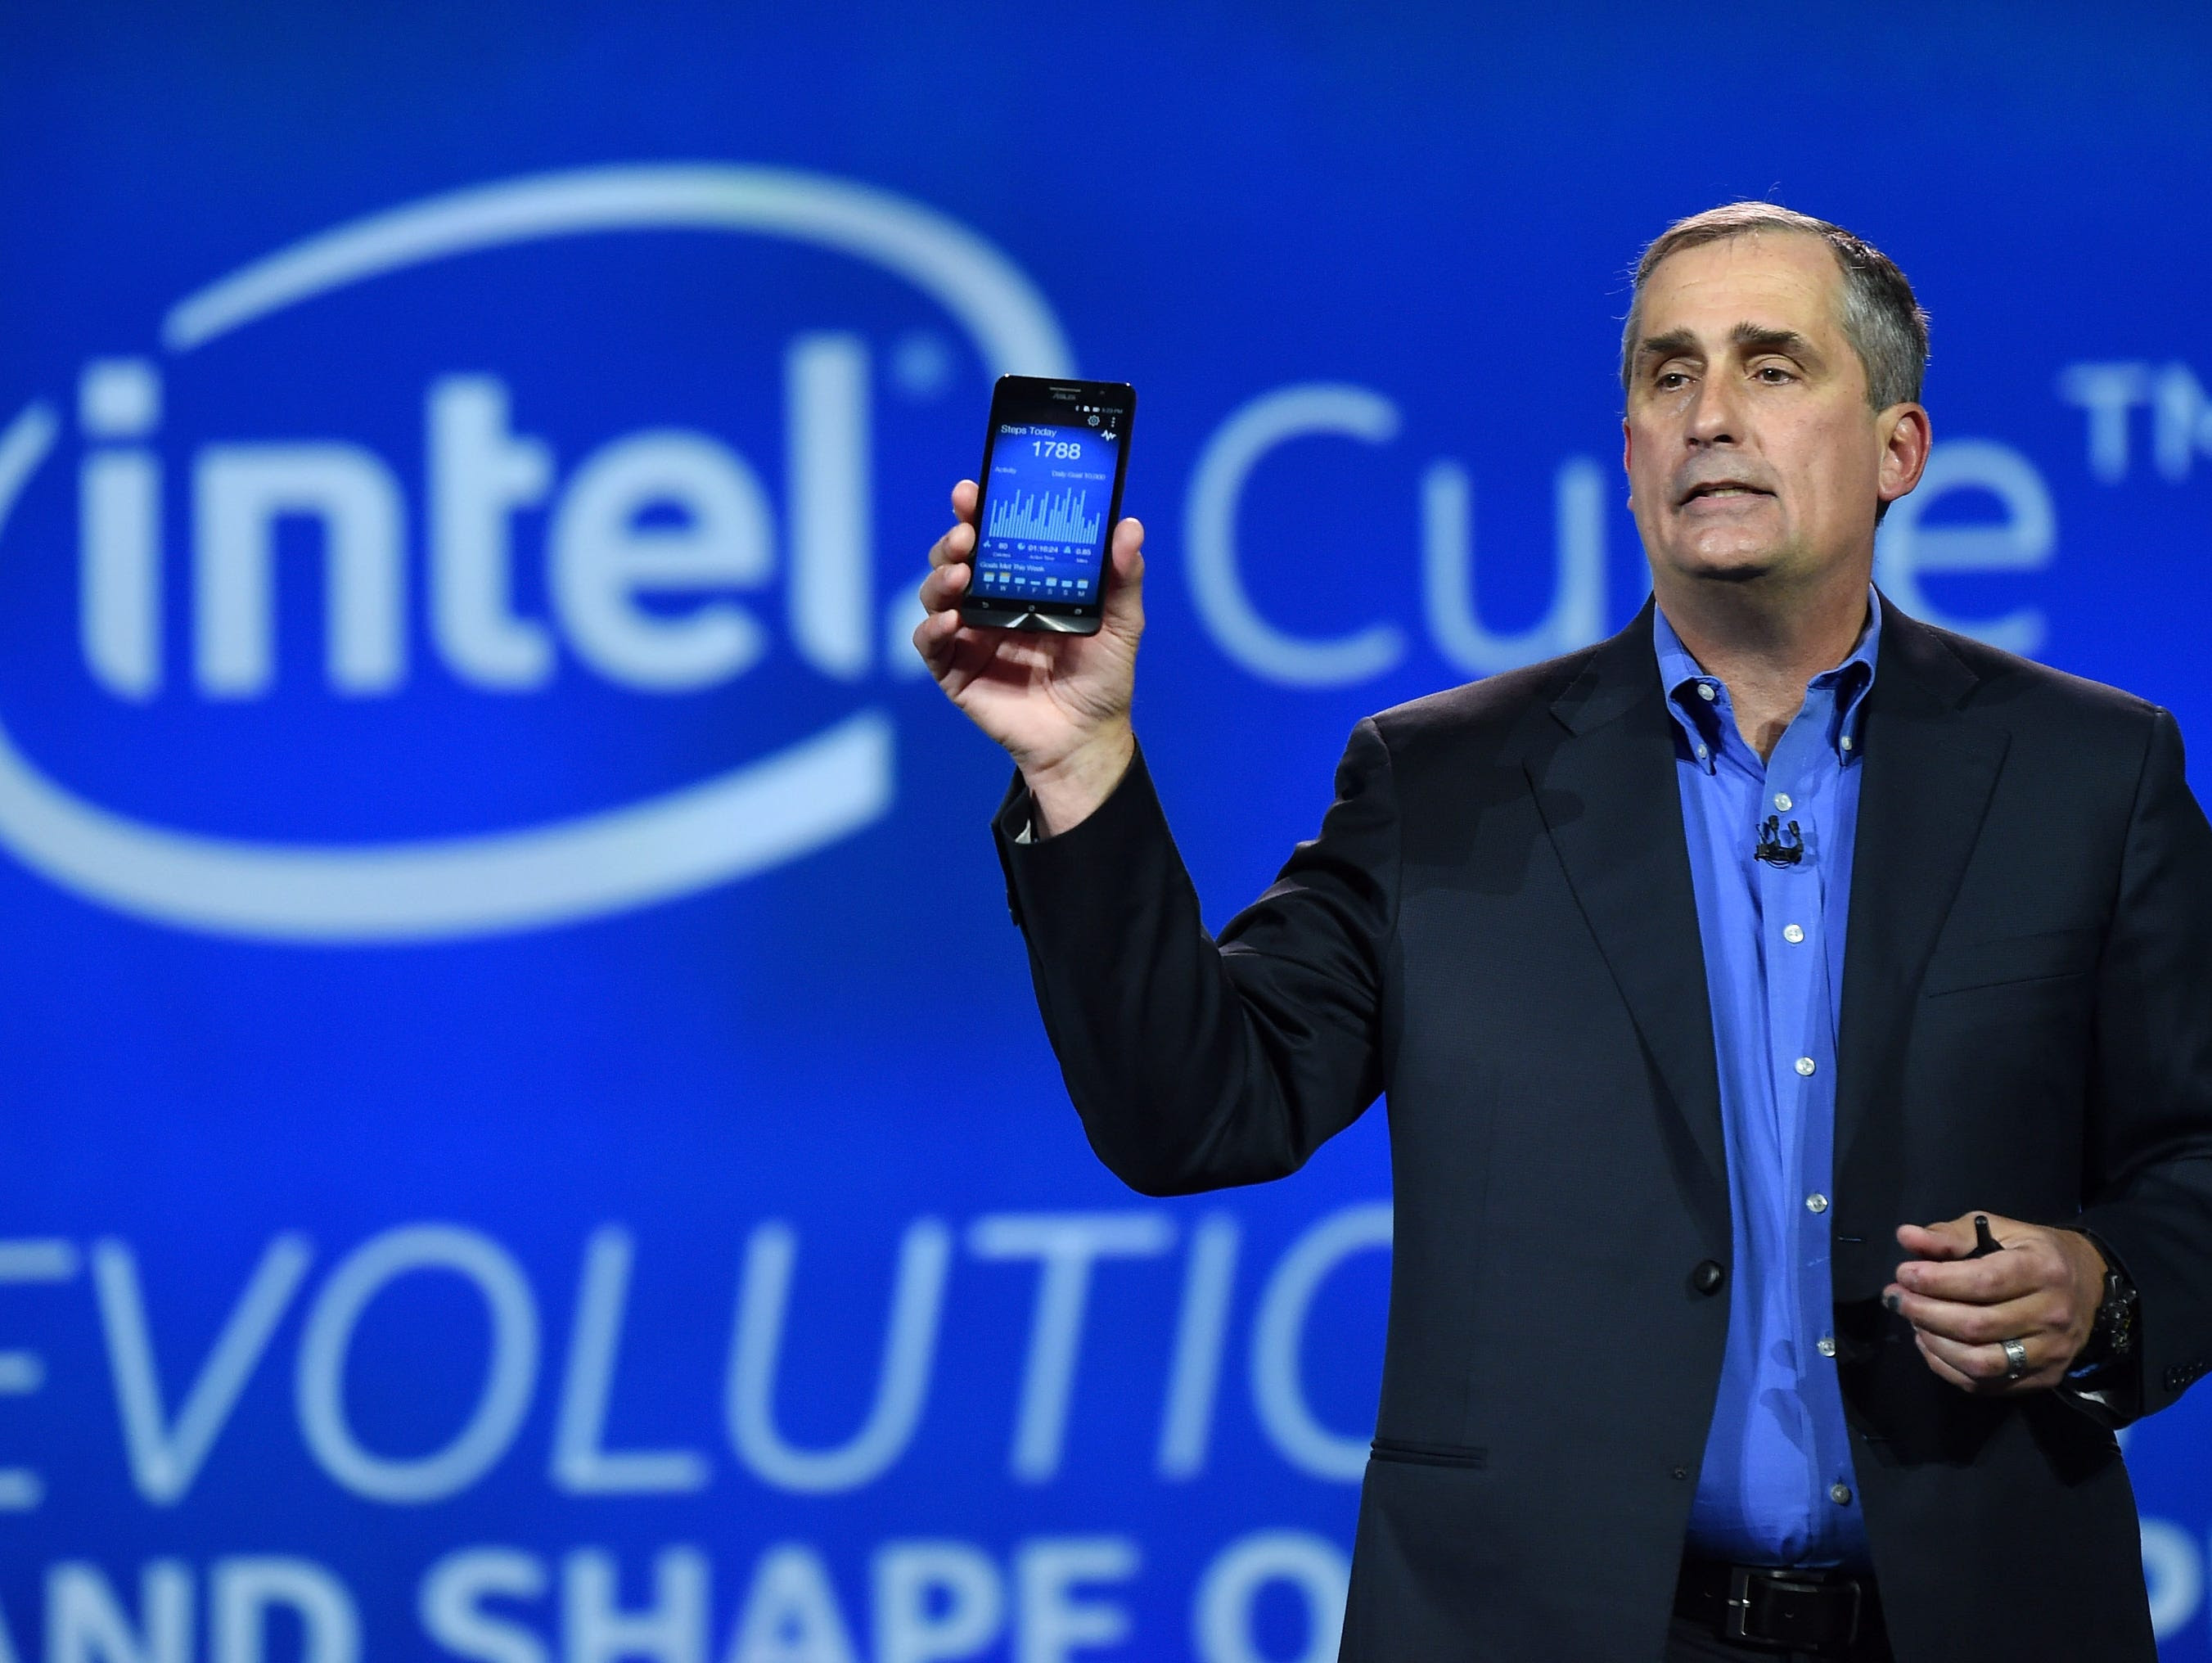 Intel CEO Brian Krzanich shows how many steps he took during a keynote address as tracked by a wearable processor called Curie, a prototype open source computer the size of a button that he unveiled at the 2015 International CES at The Venetian Las V